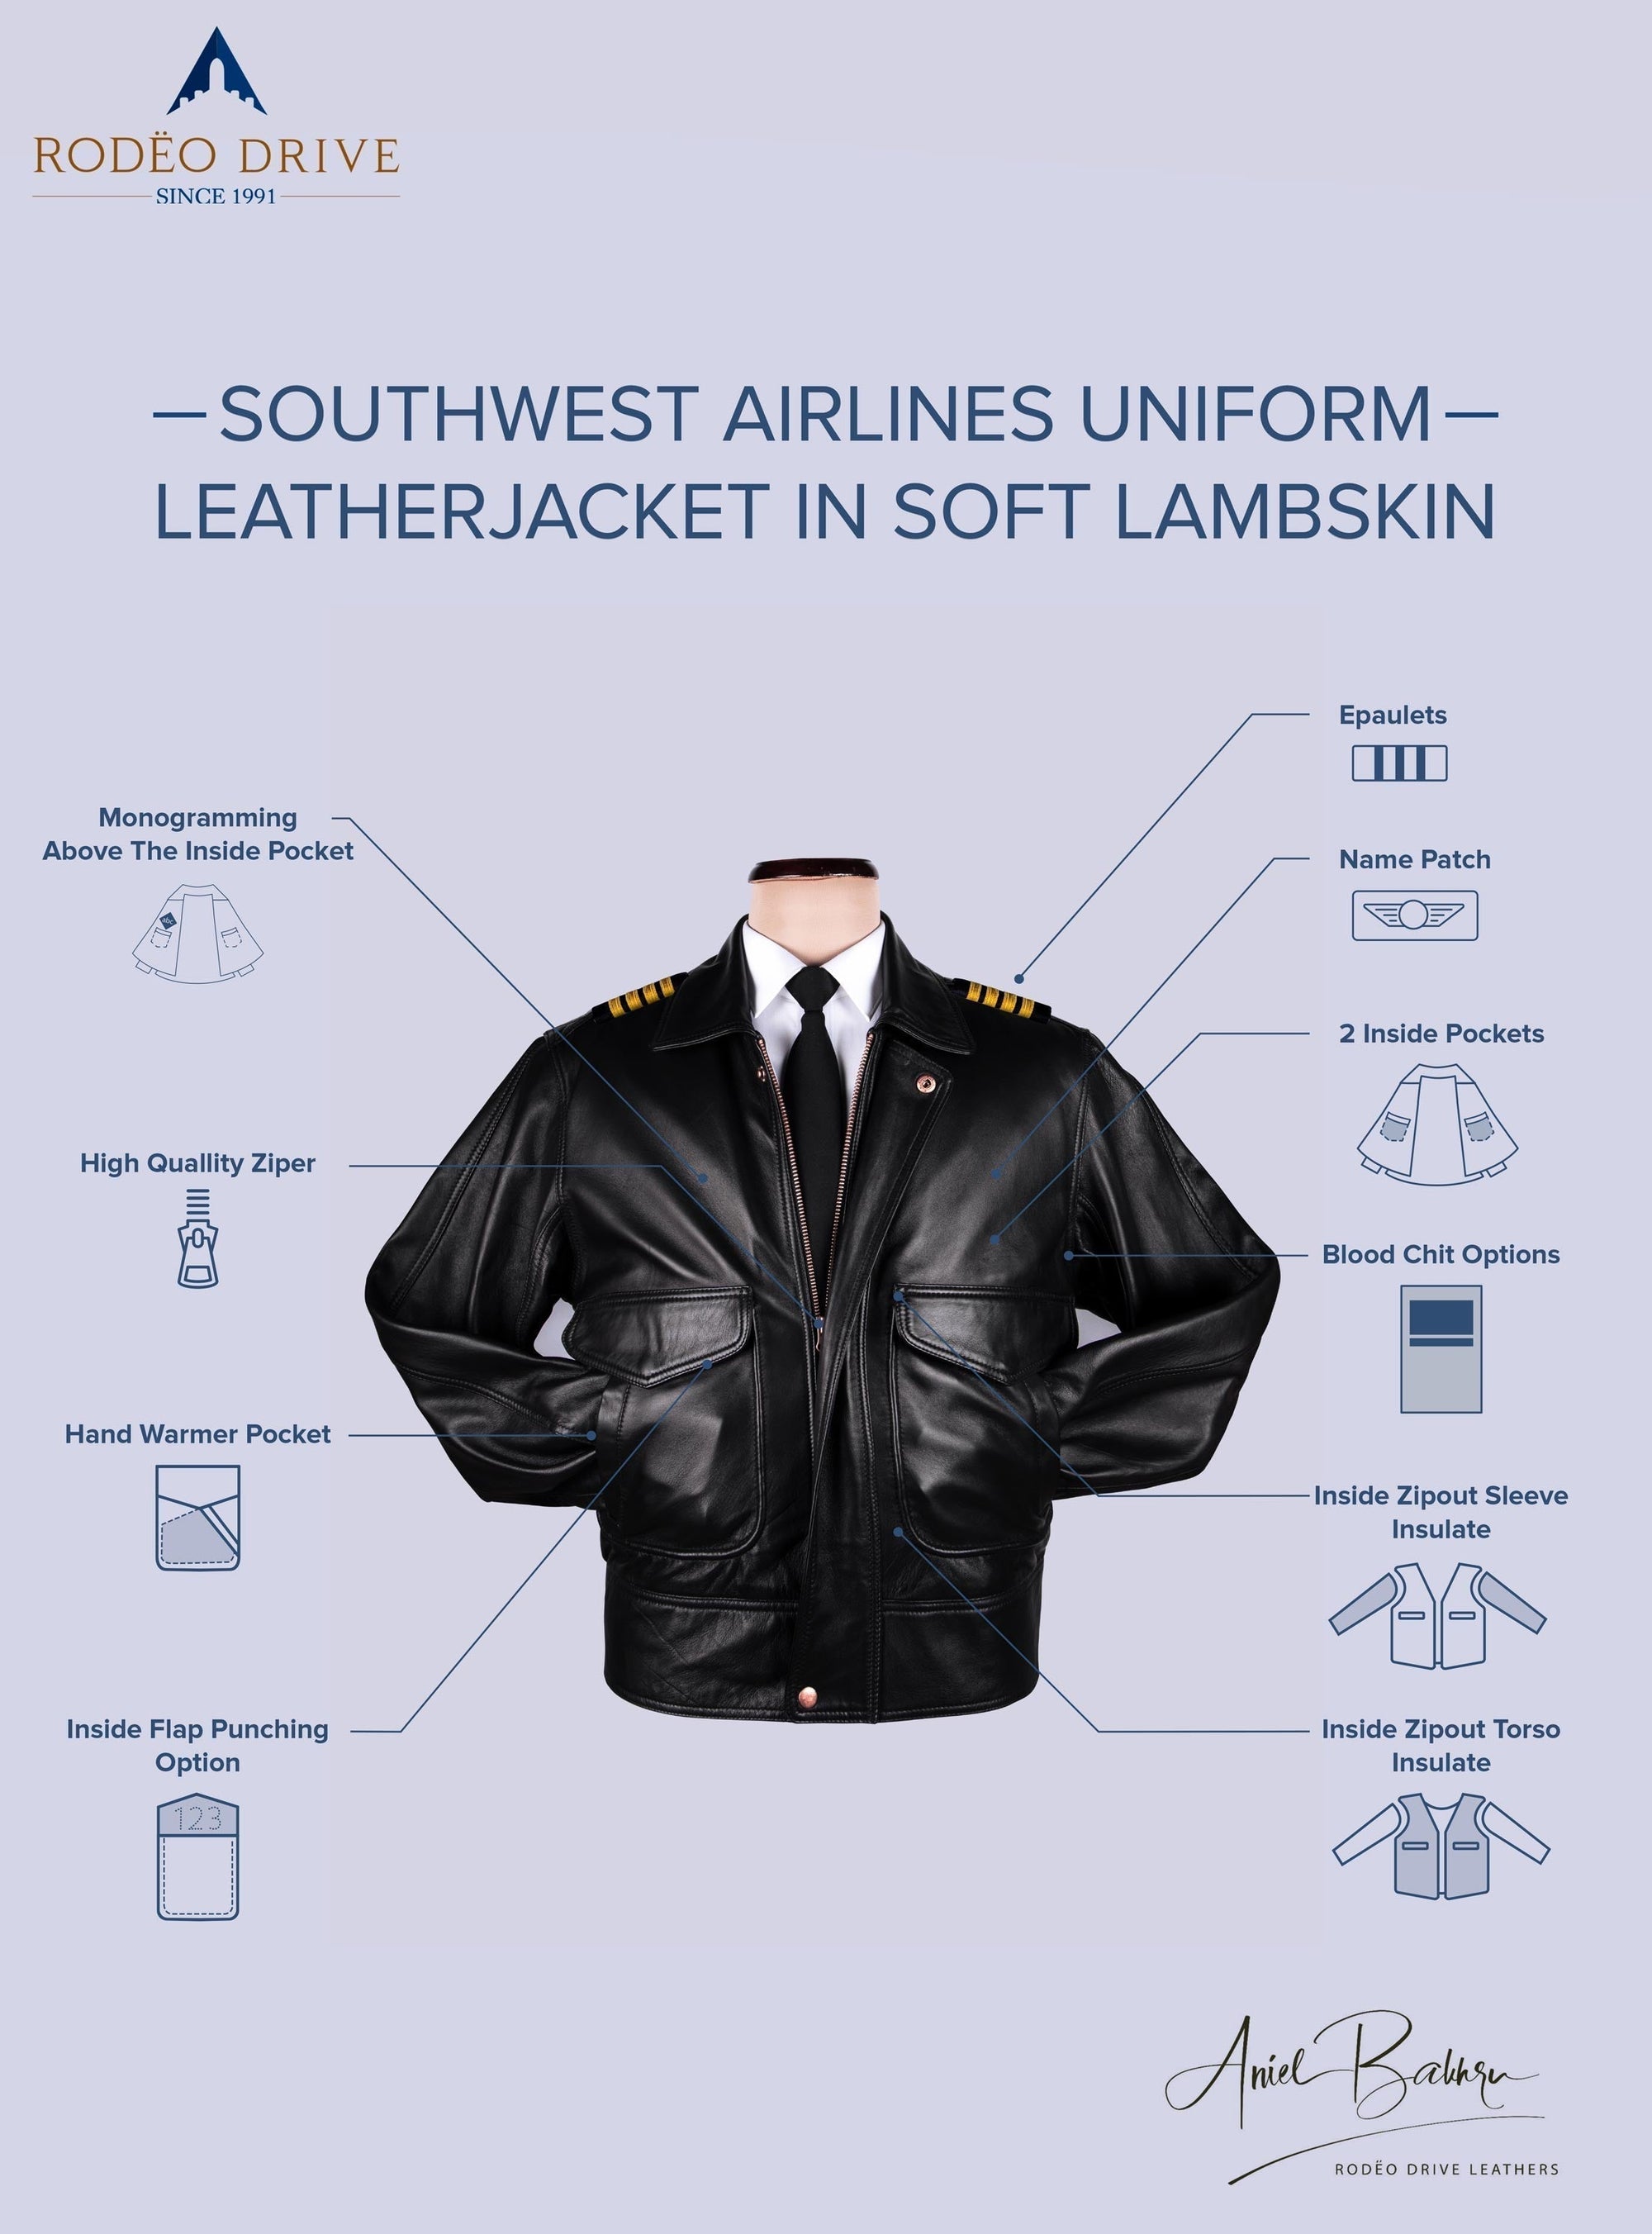 anatomy of southwest airlines uniform - leather jacket in soft lambskin